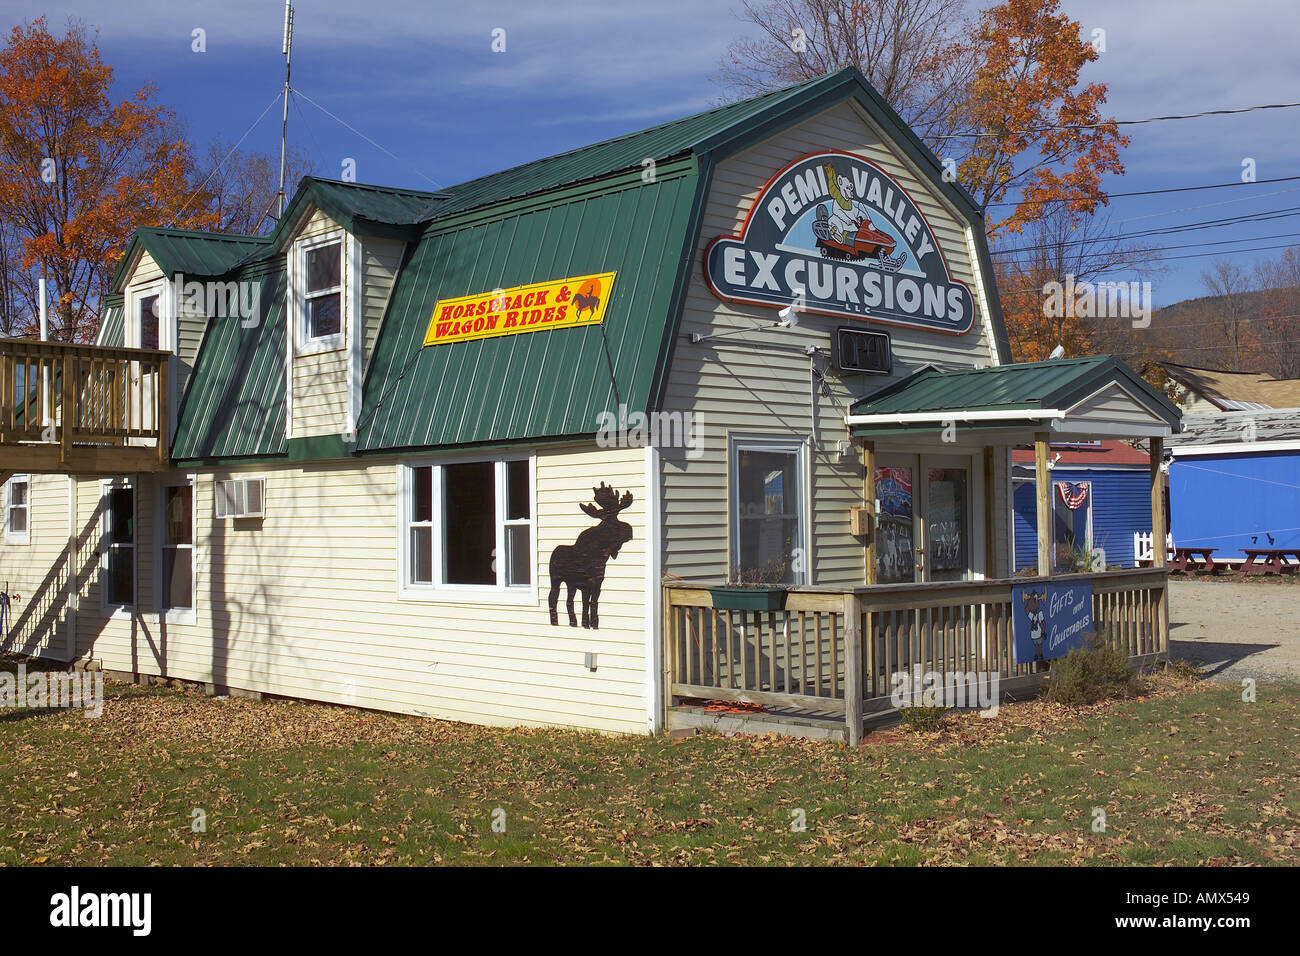 New Hampshire, Lincoln, Moose Excursions Stock Photo